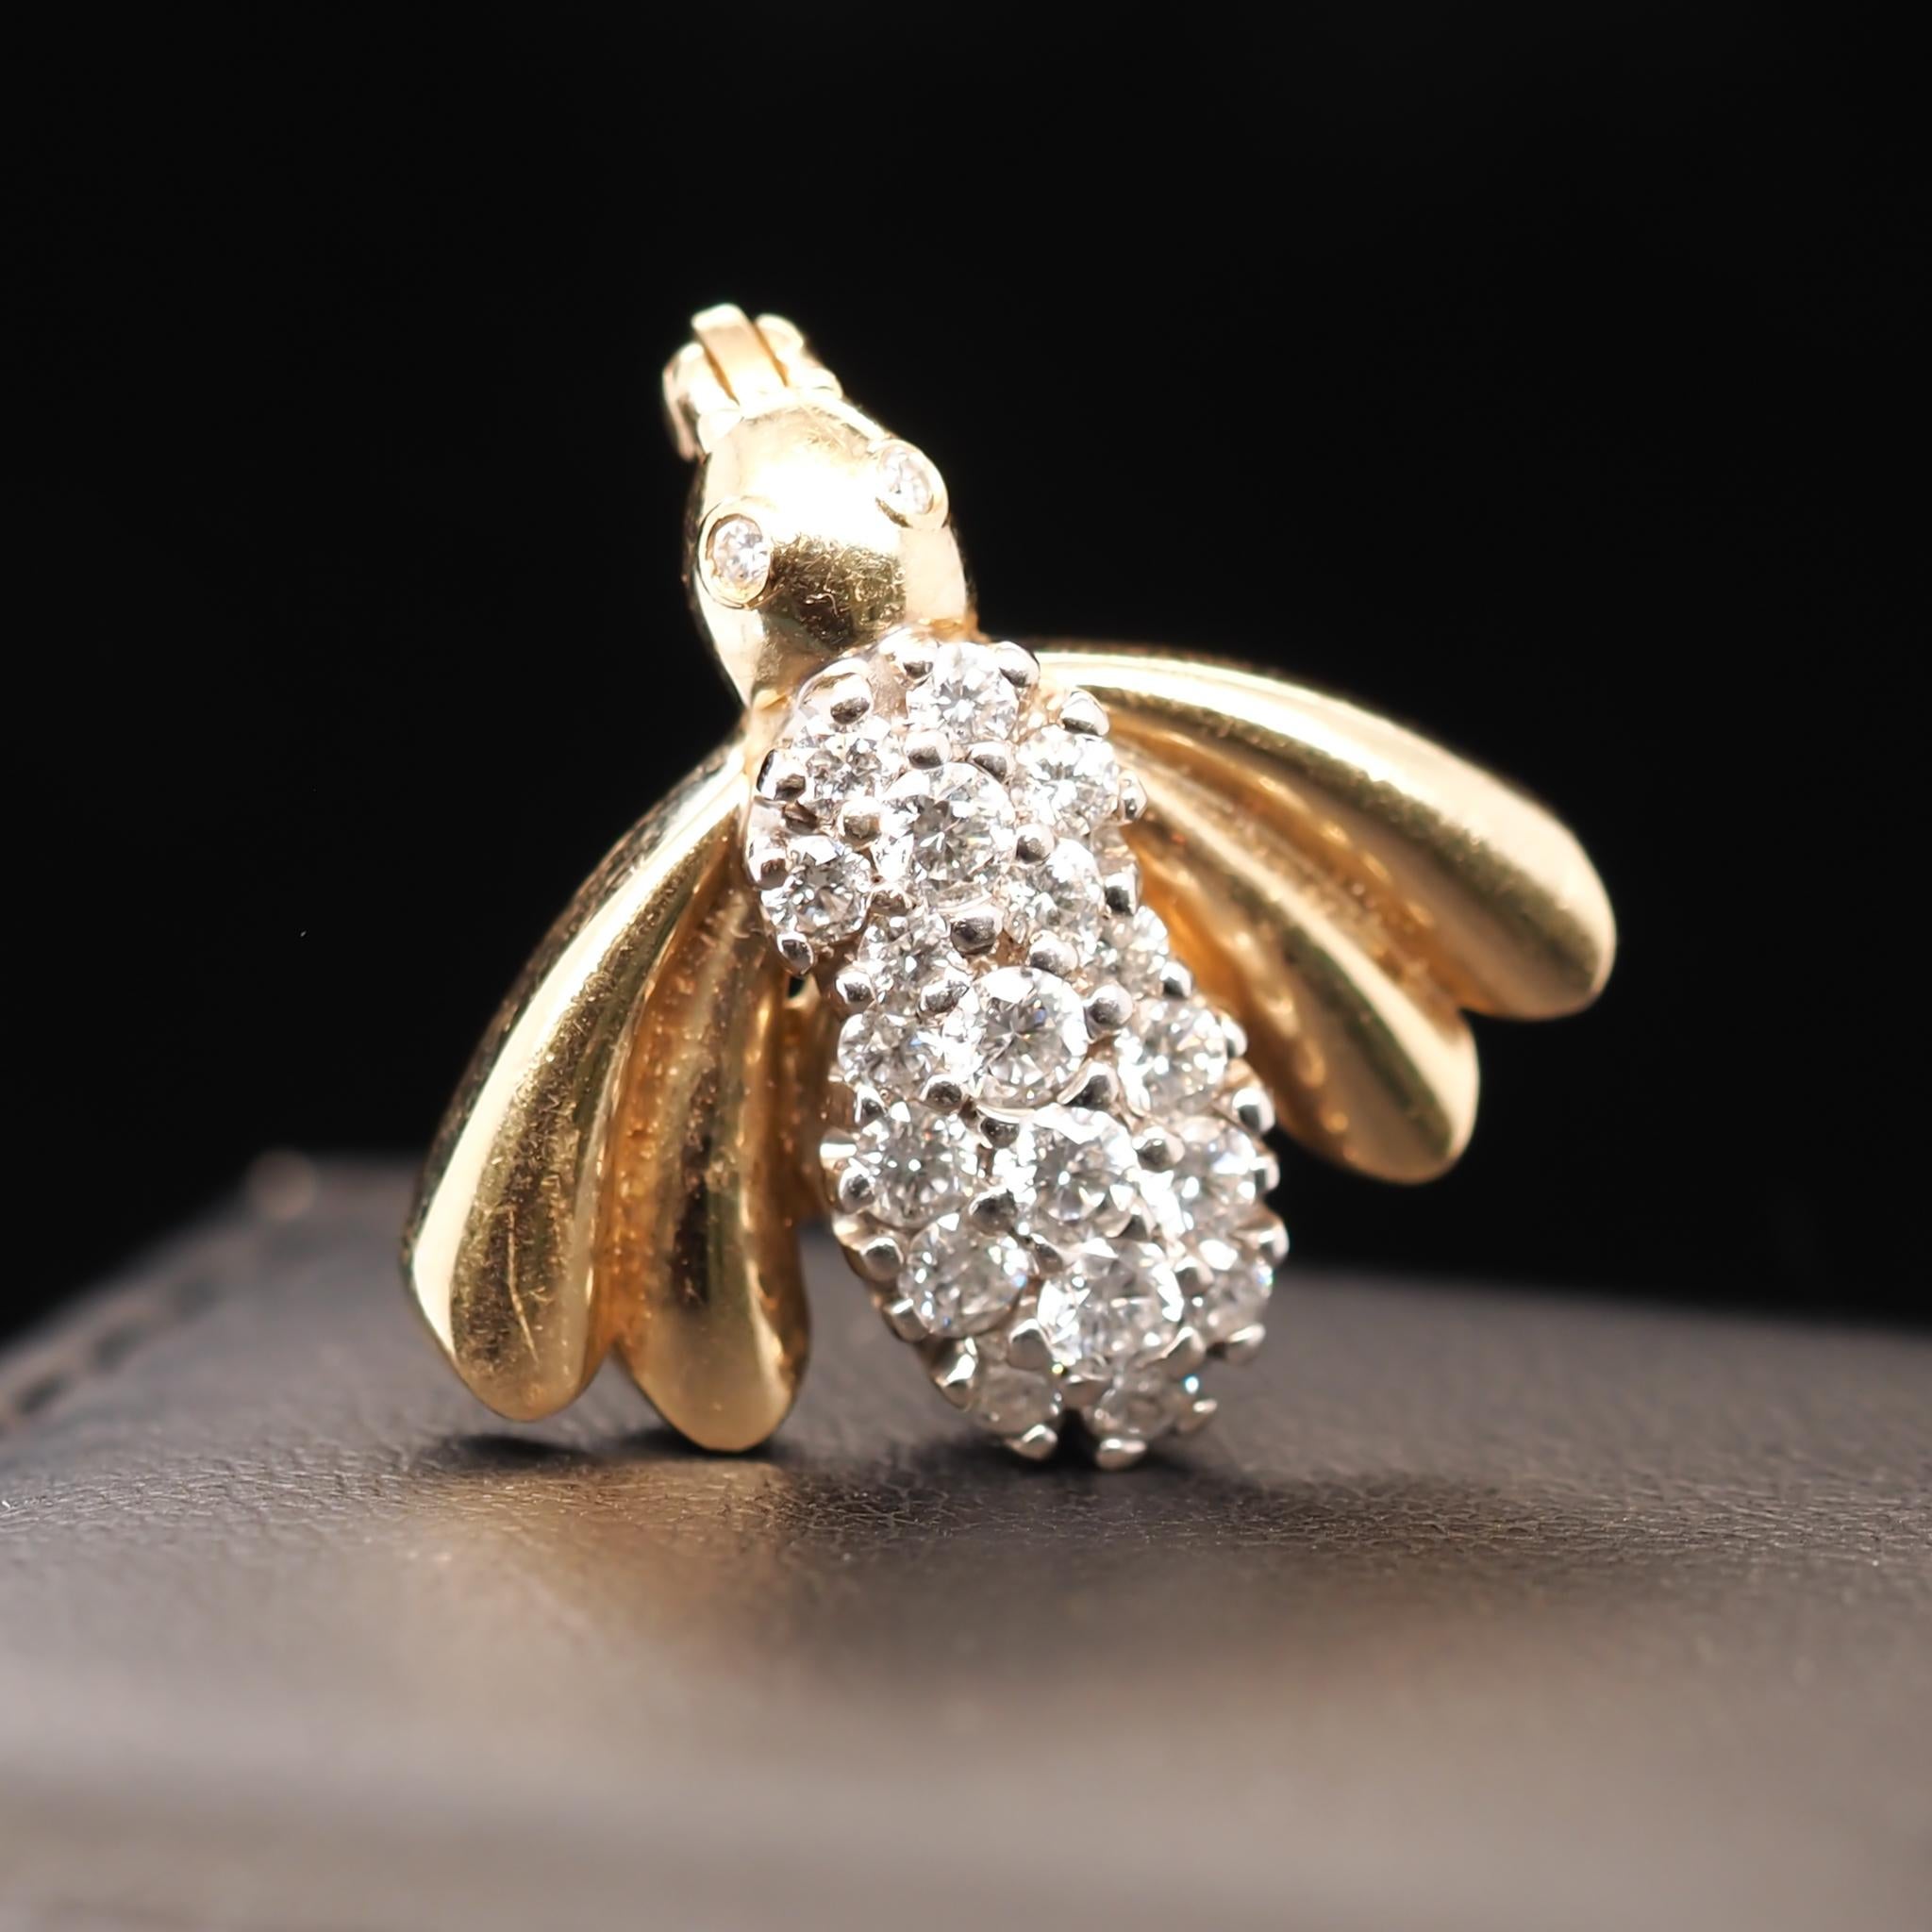 Item Details:
Metal Type: 14K Yellow Gold [Hallmarked, and Tested]
Weight: 4.7 grams

Diamond Details: .50ct, Round Brilliant, Natural Diamonds, H-I, SI

Pin Measurements:
Length: 19.75mm
Condition: Excellent